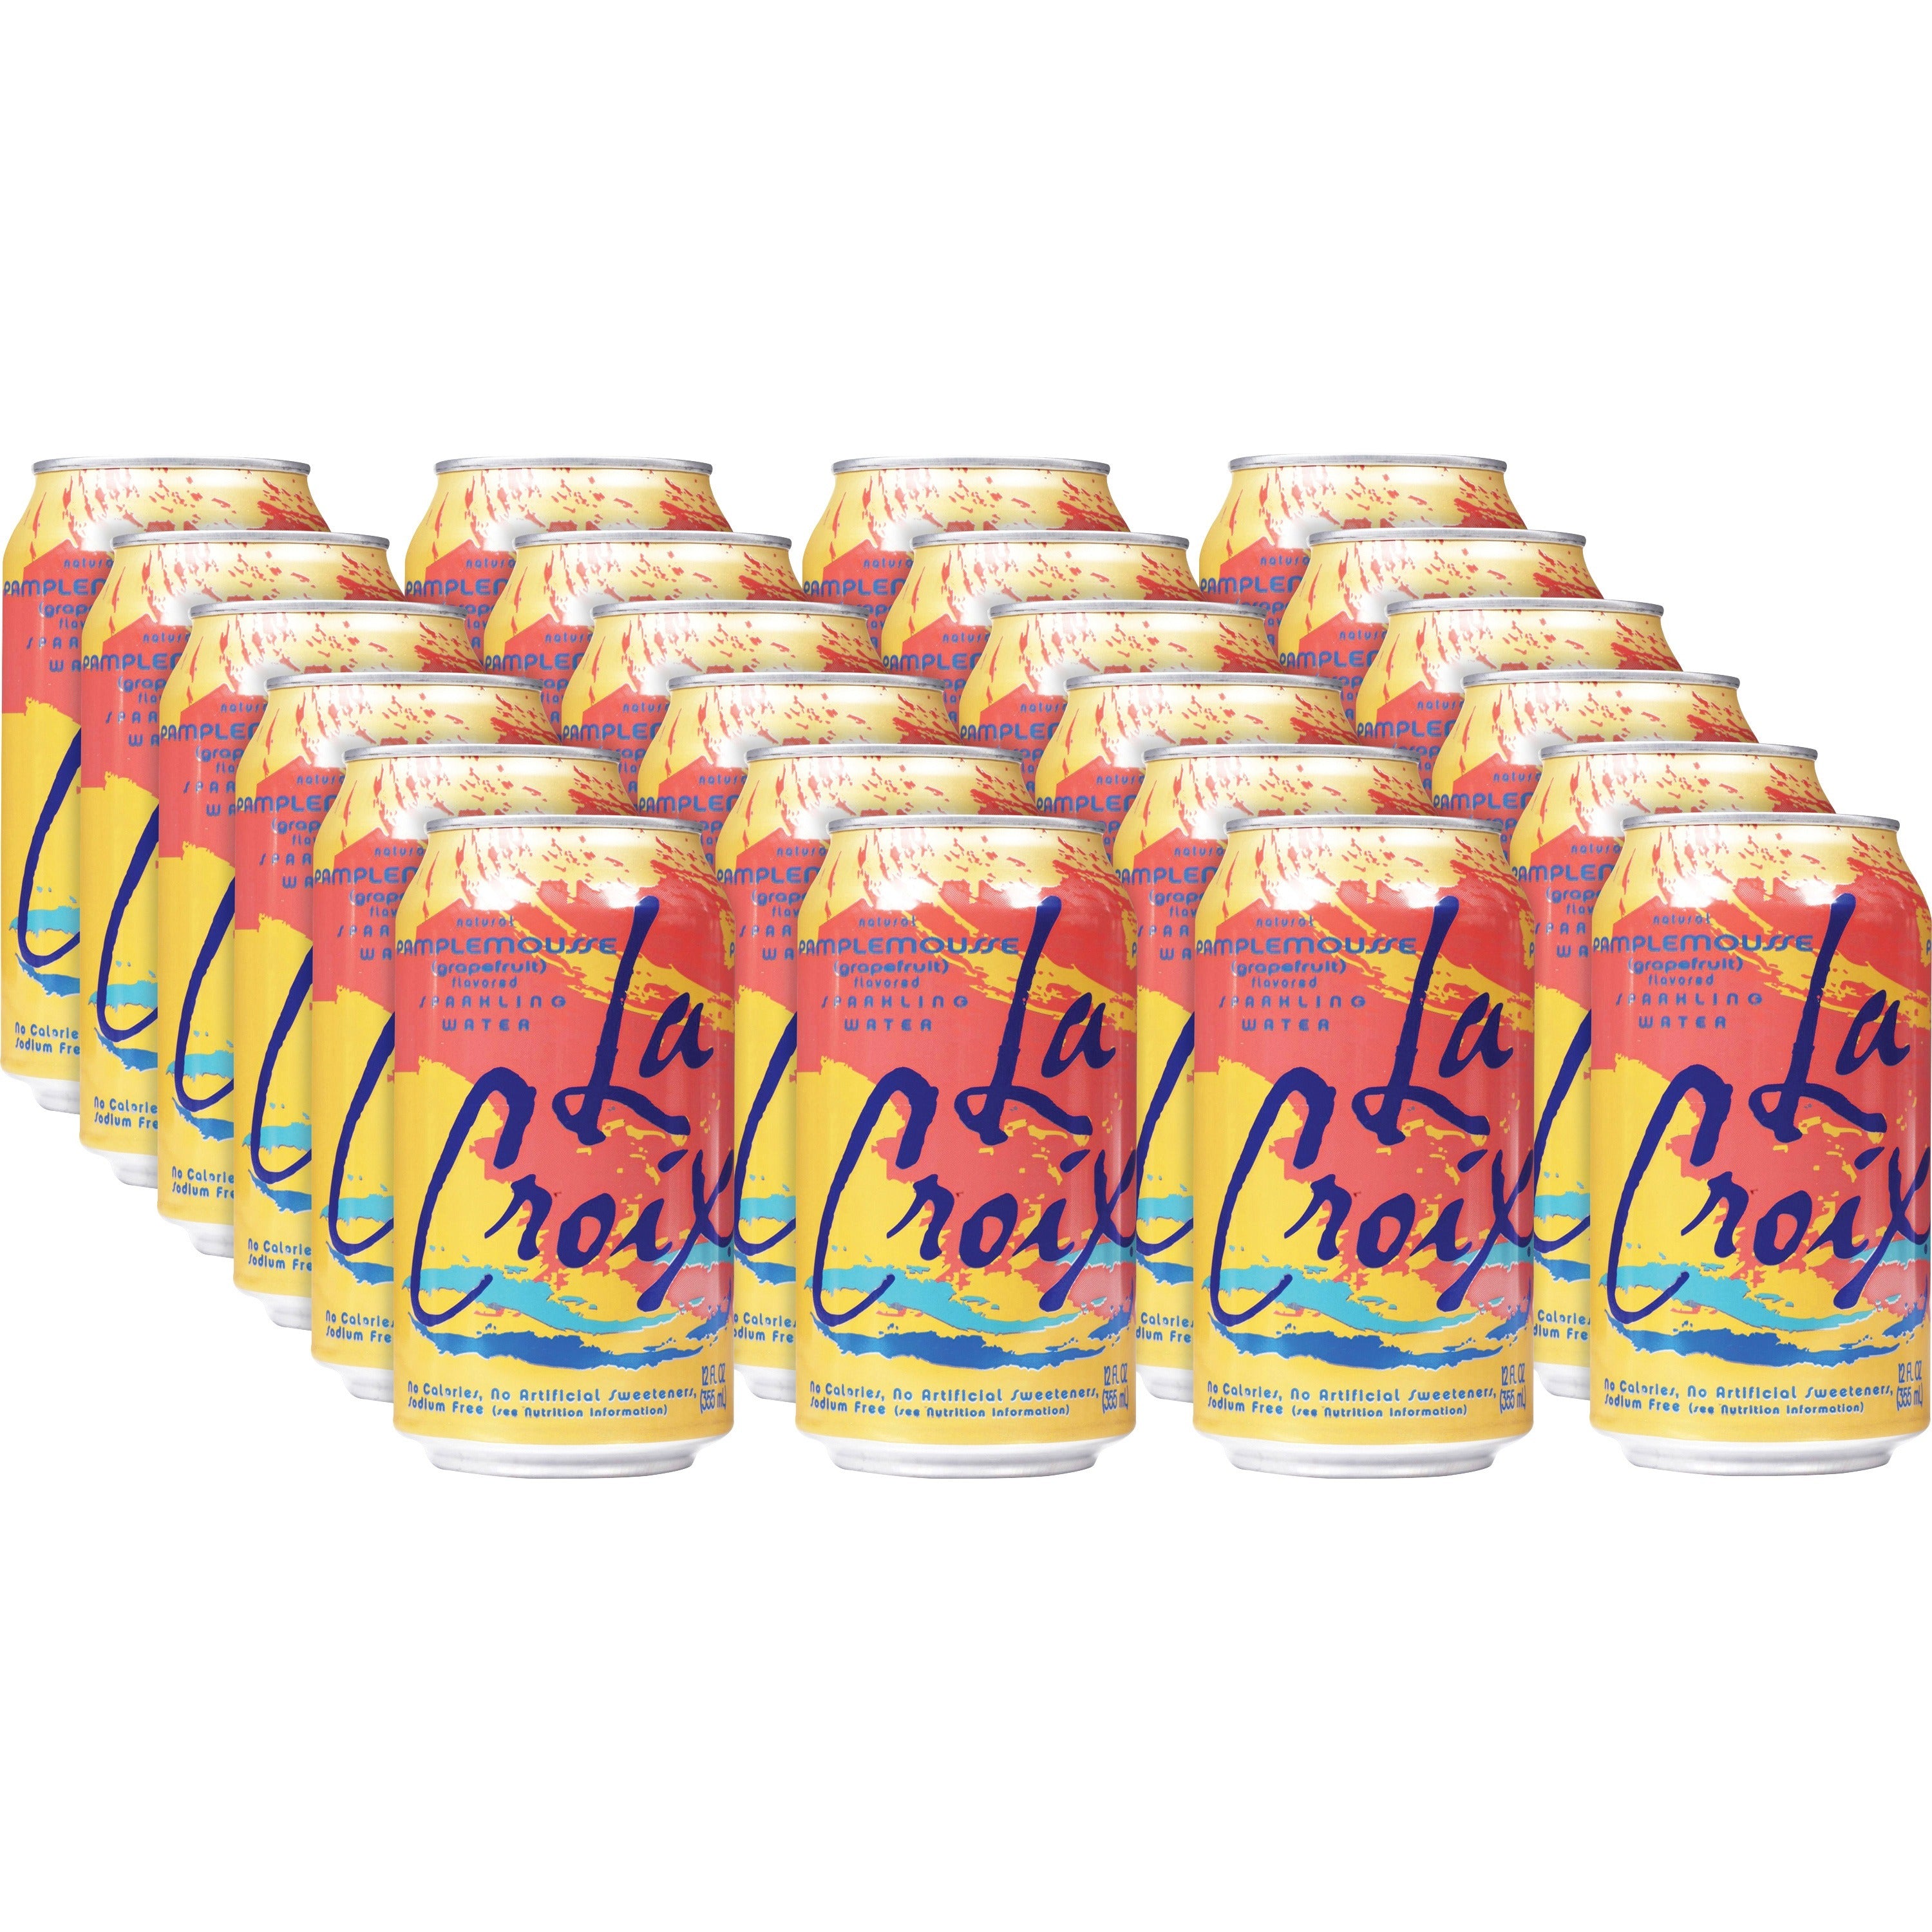 lacroix-pamplemousse-flavored-sparkling-water-ready-to-drink-12-fl-oz-355-ml-2-carton-12-pack_lcx40120 - 1